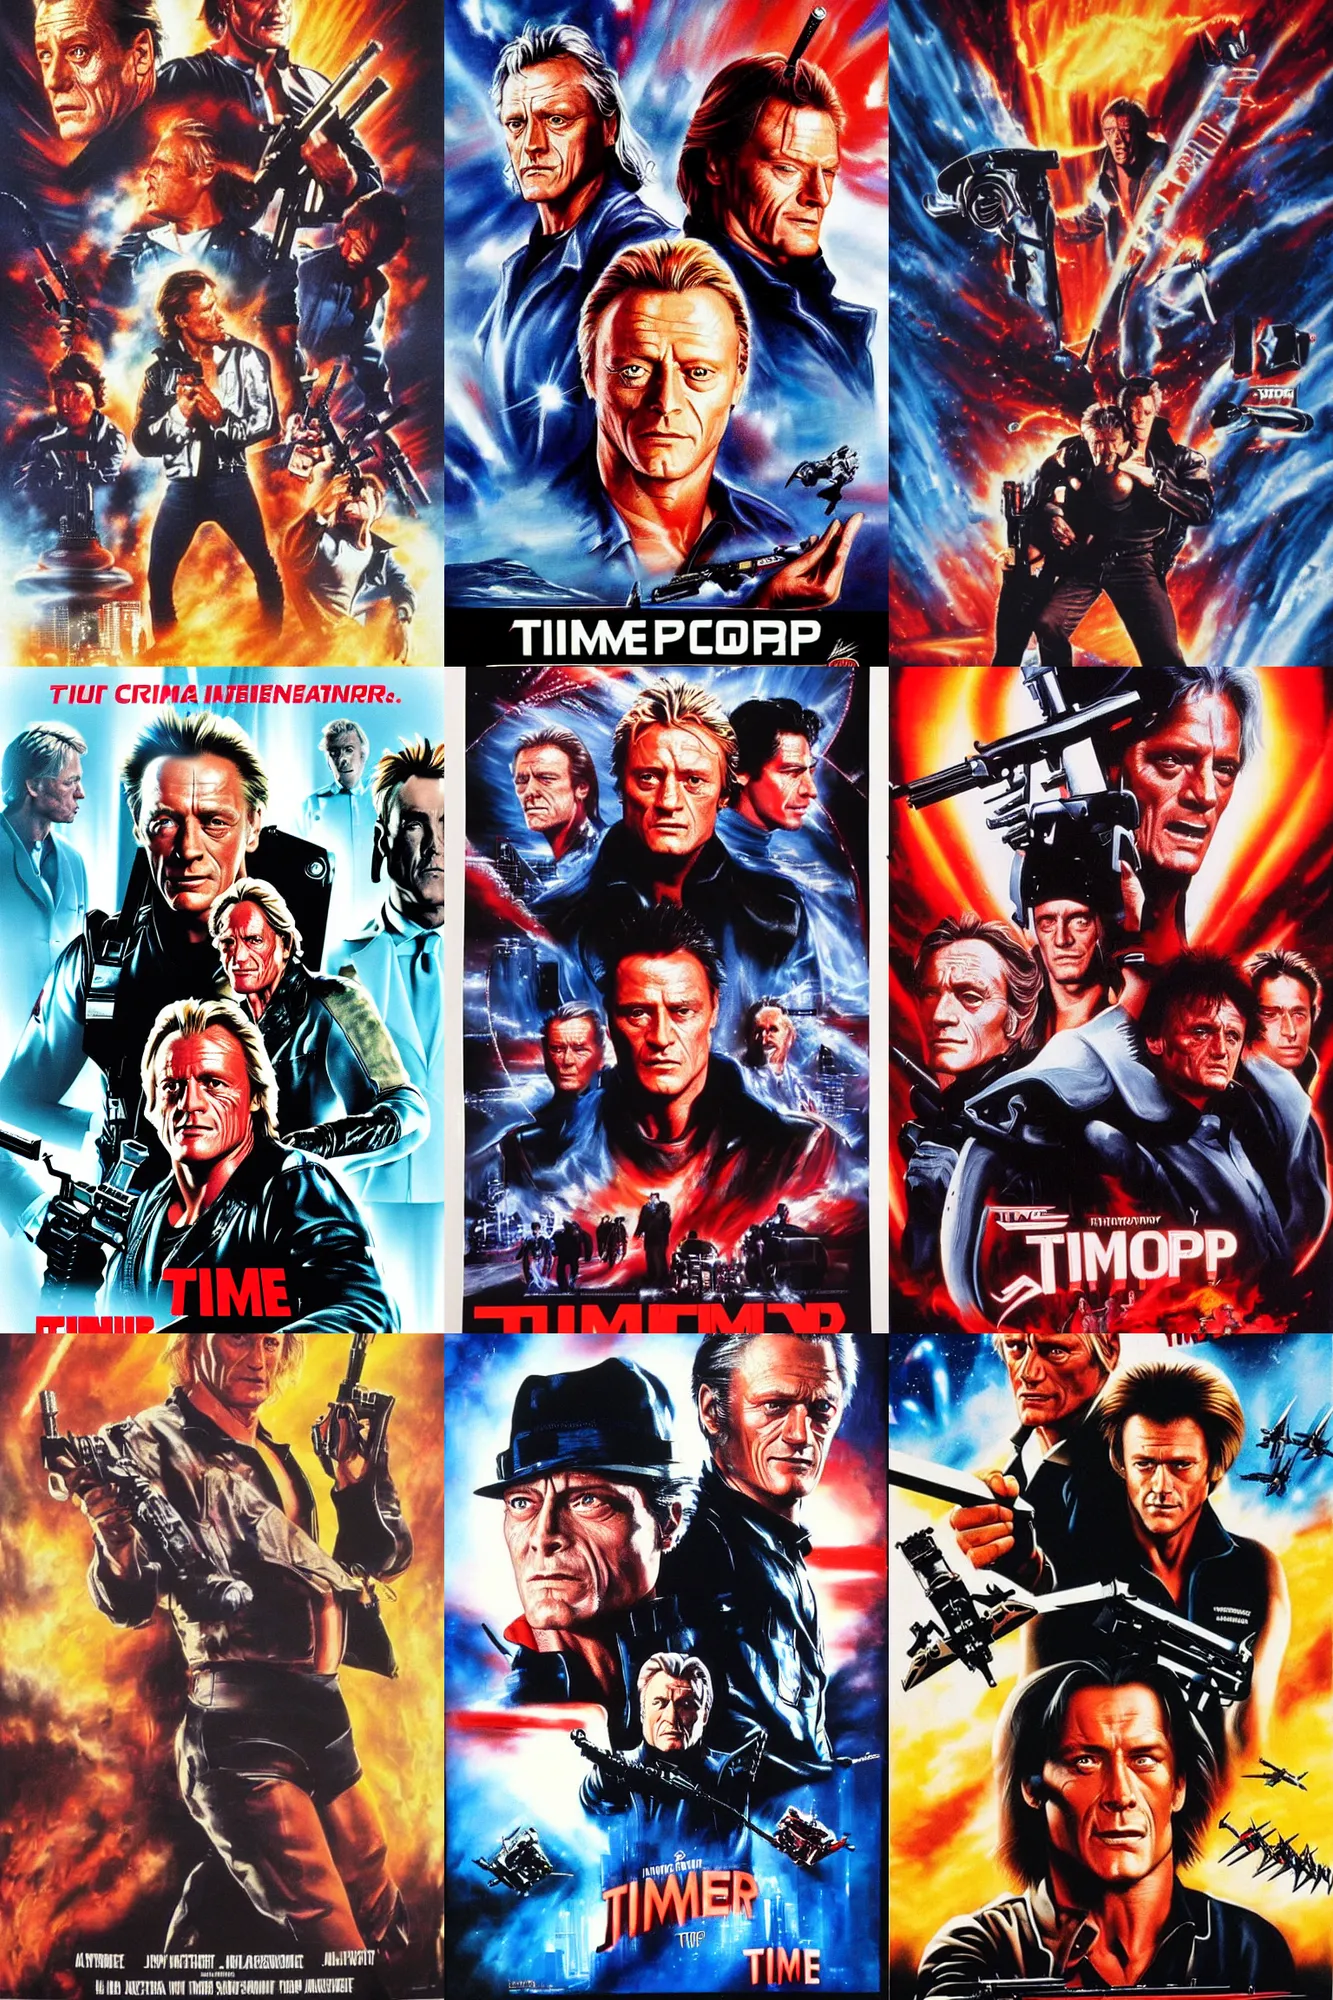 Prompt: movie poster for timecop academy, starring ( jcvd ), rutger hauer!, lance henriksen!, jeff fahey!!, airbrushed artwork, big heads, explosions, supporting characters, dramatic expressions